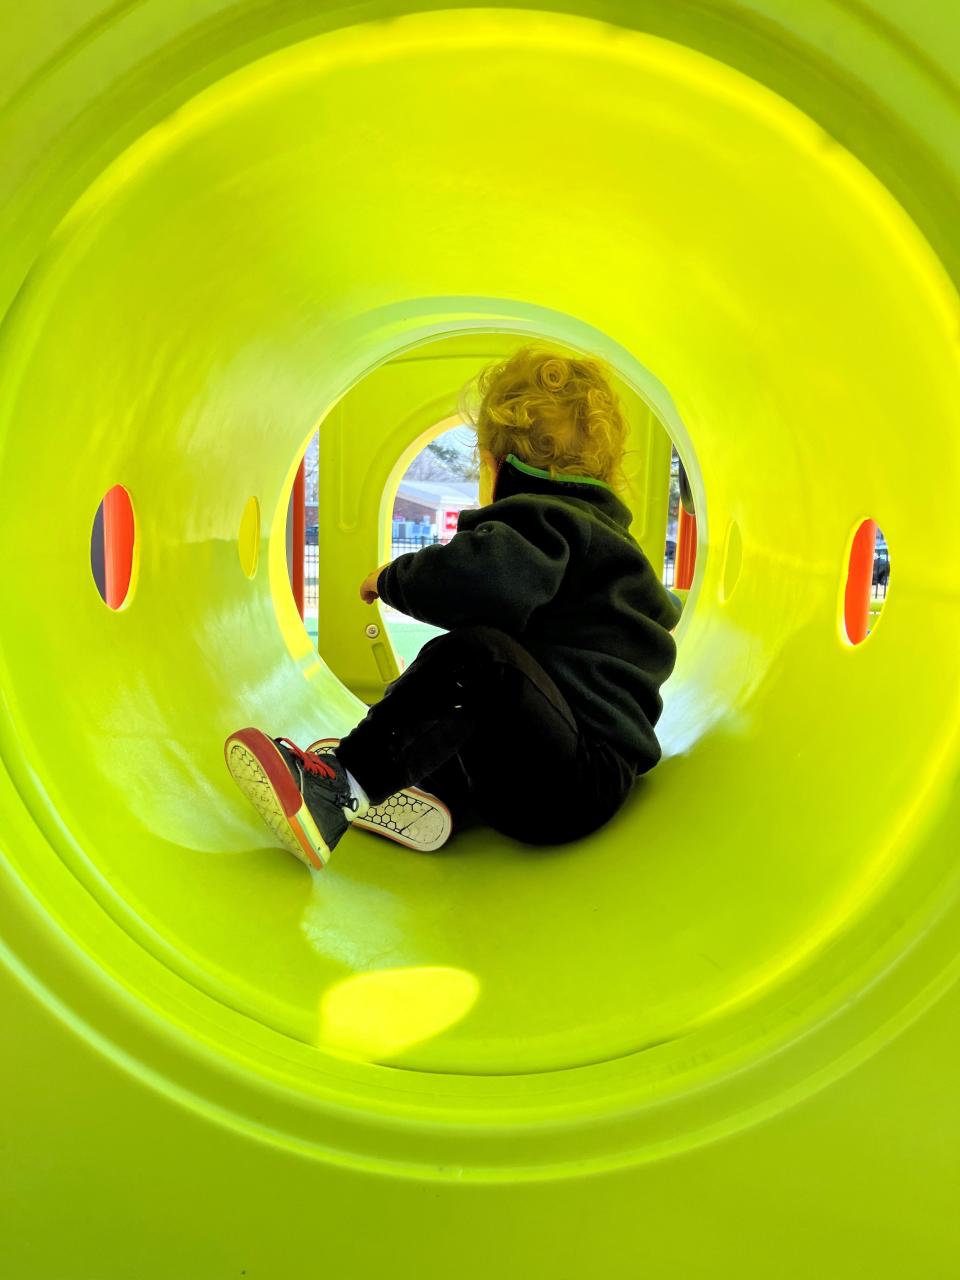 Tess Bennett's 2-year-old son, Henry, enjoys a day at the playground Feb. 27. You'd likely never guess that minutes before this photo, he uttered a profanity for the first time.